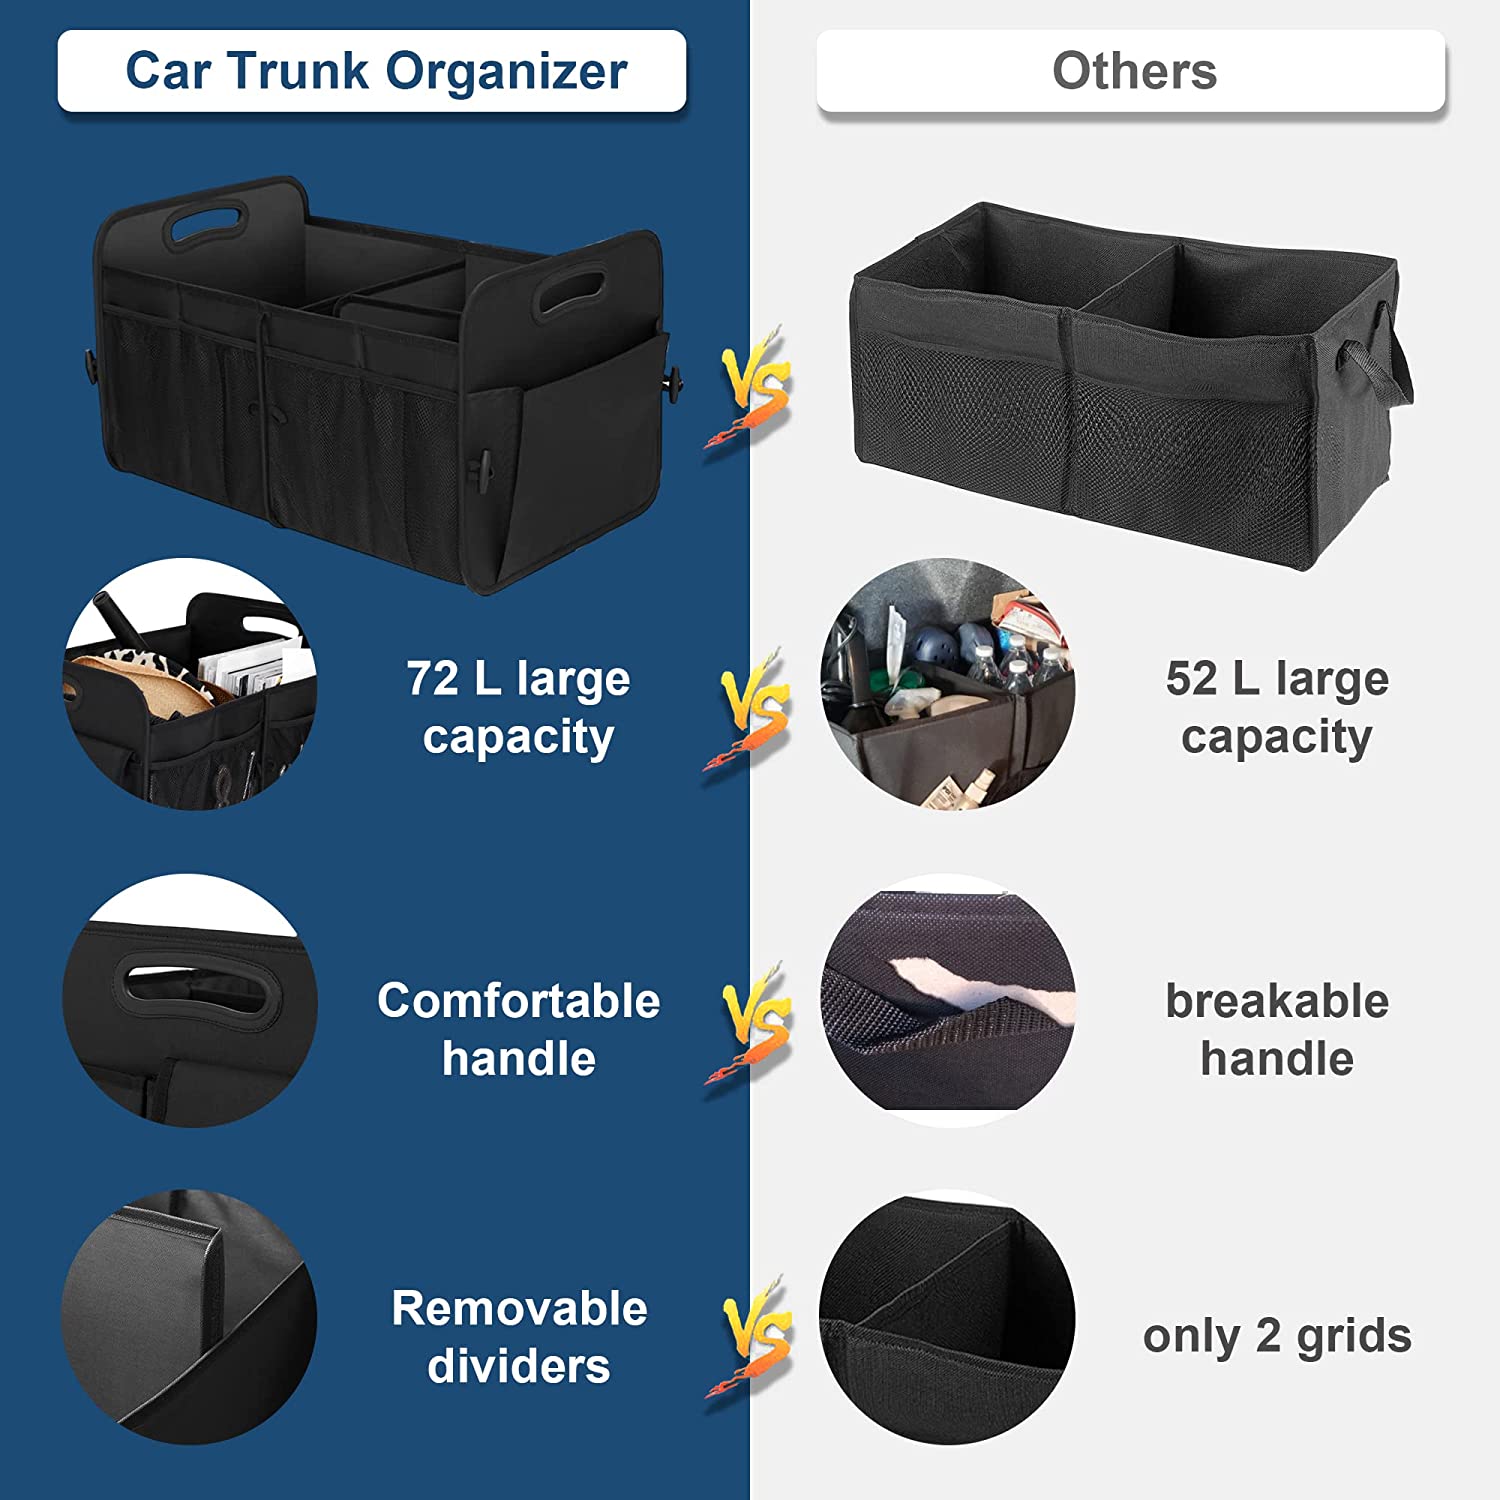 Car Trunk Organizer,Car Storage Organizer with 72L Large Capacity Waterproof Collapsible and 11 Pockets, Trunk Organizer for Car Suv/Jeep/Sedan